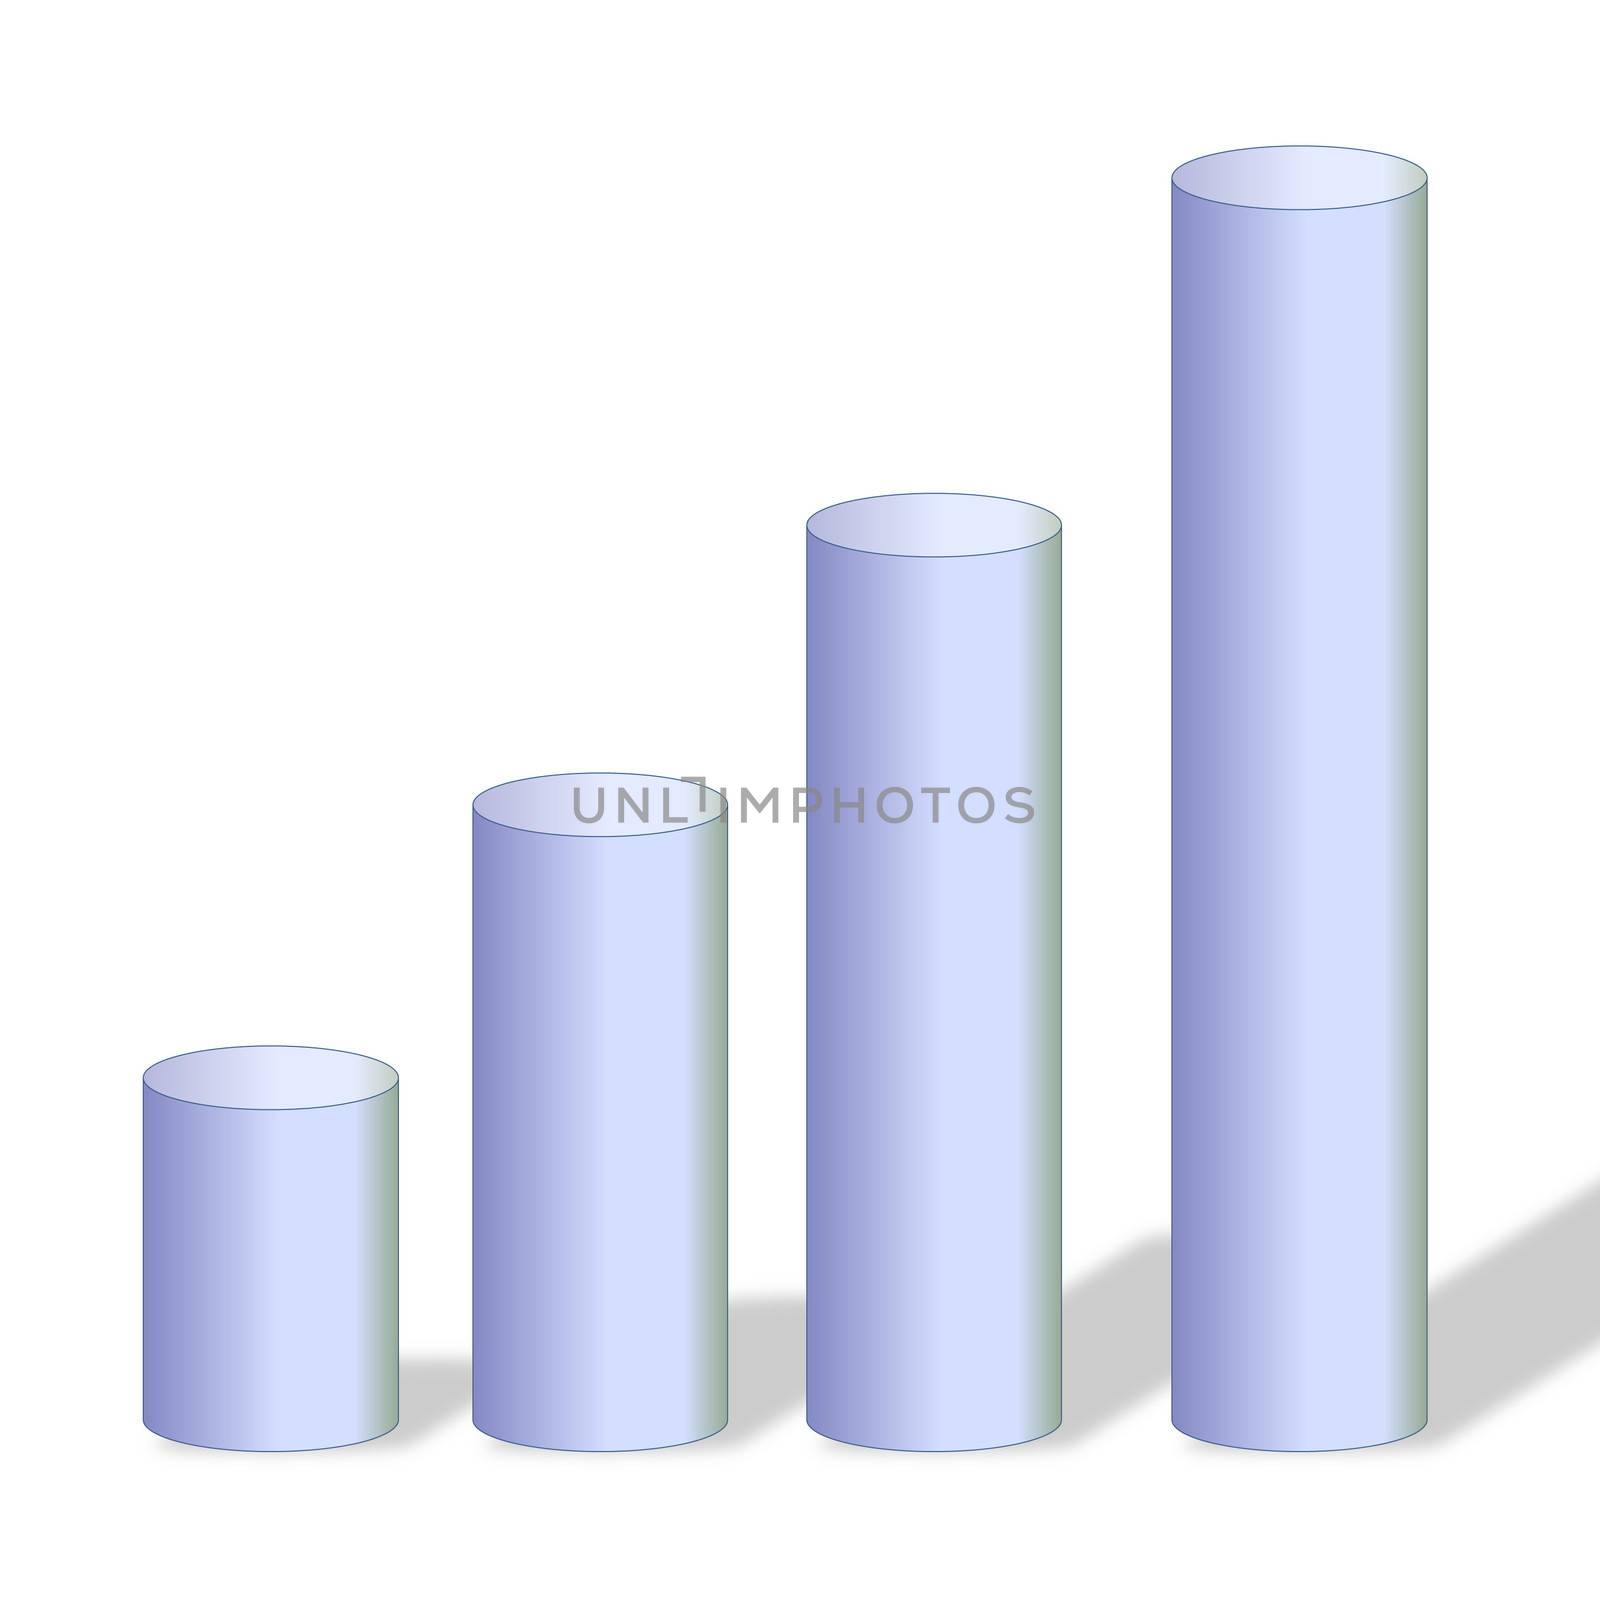 Four grey cylinders small to big in a white background